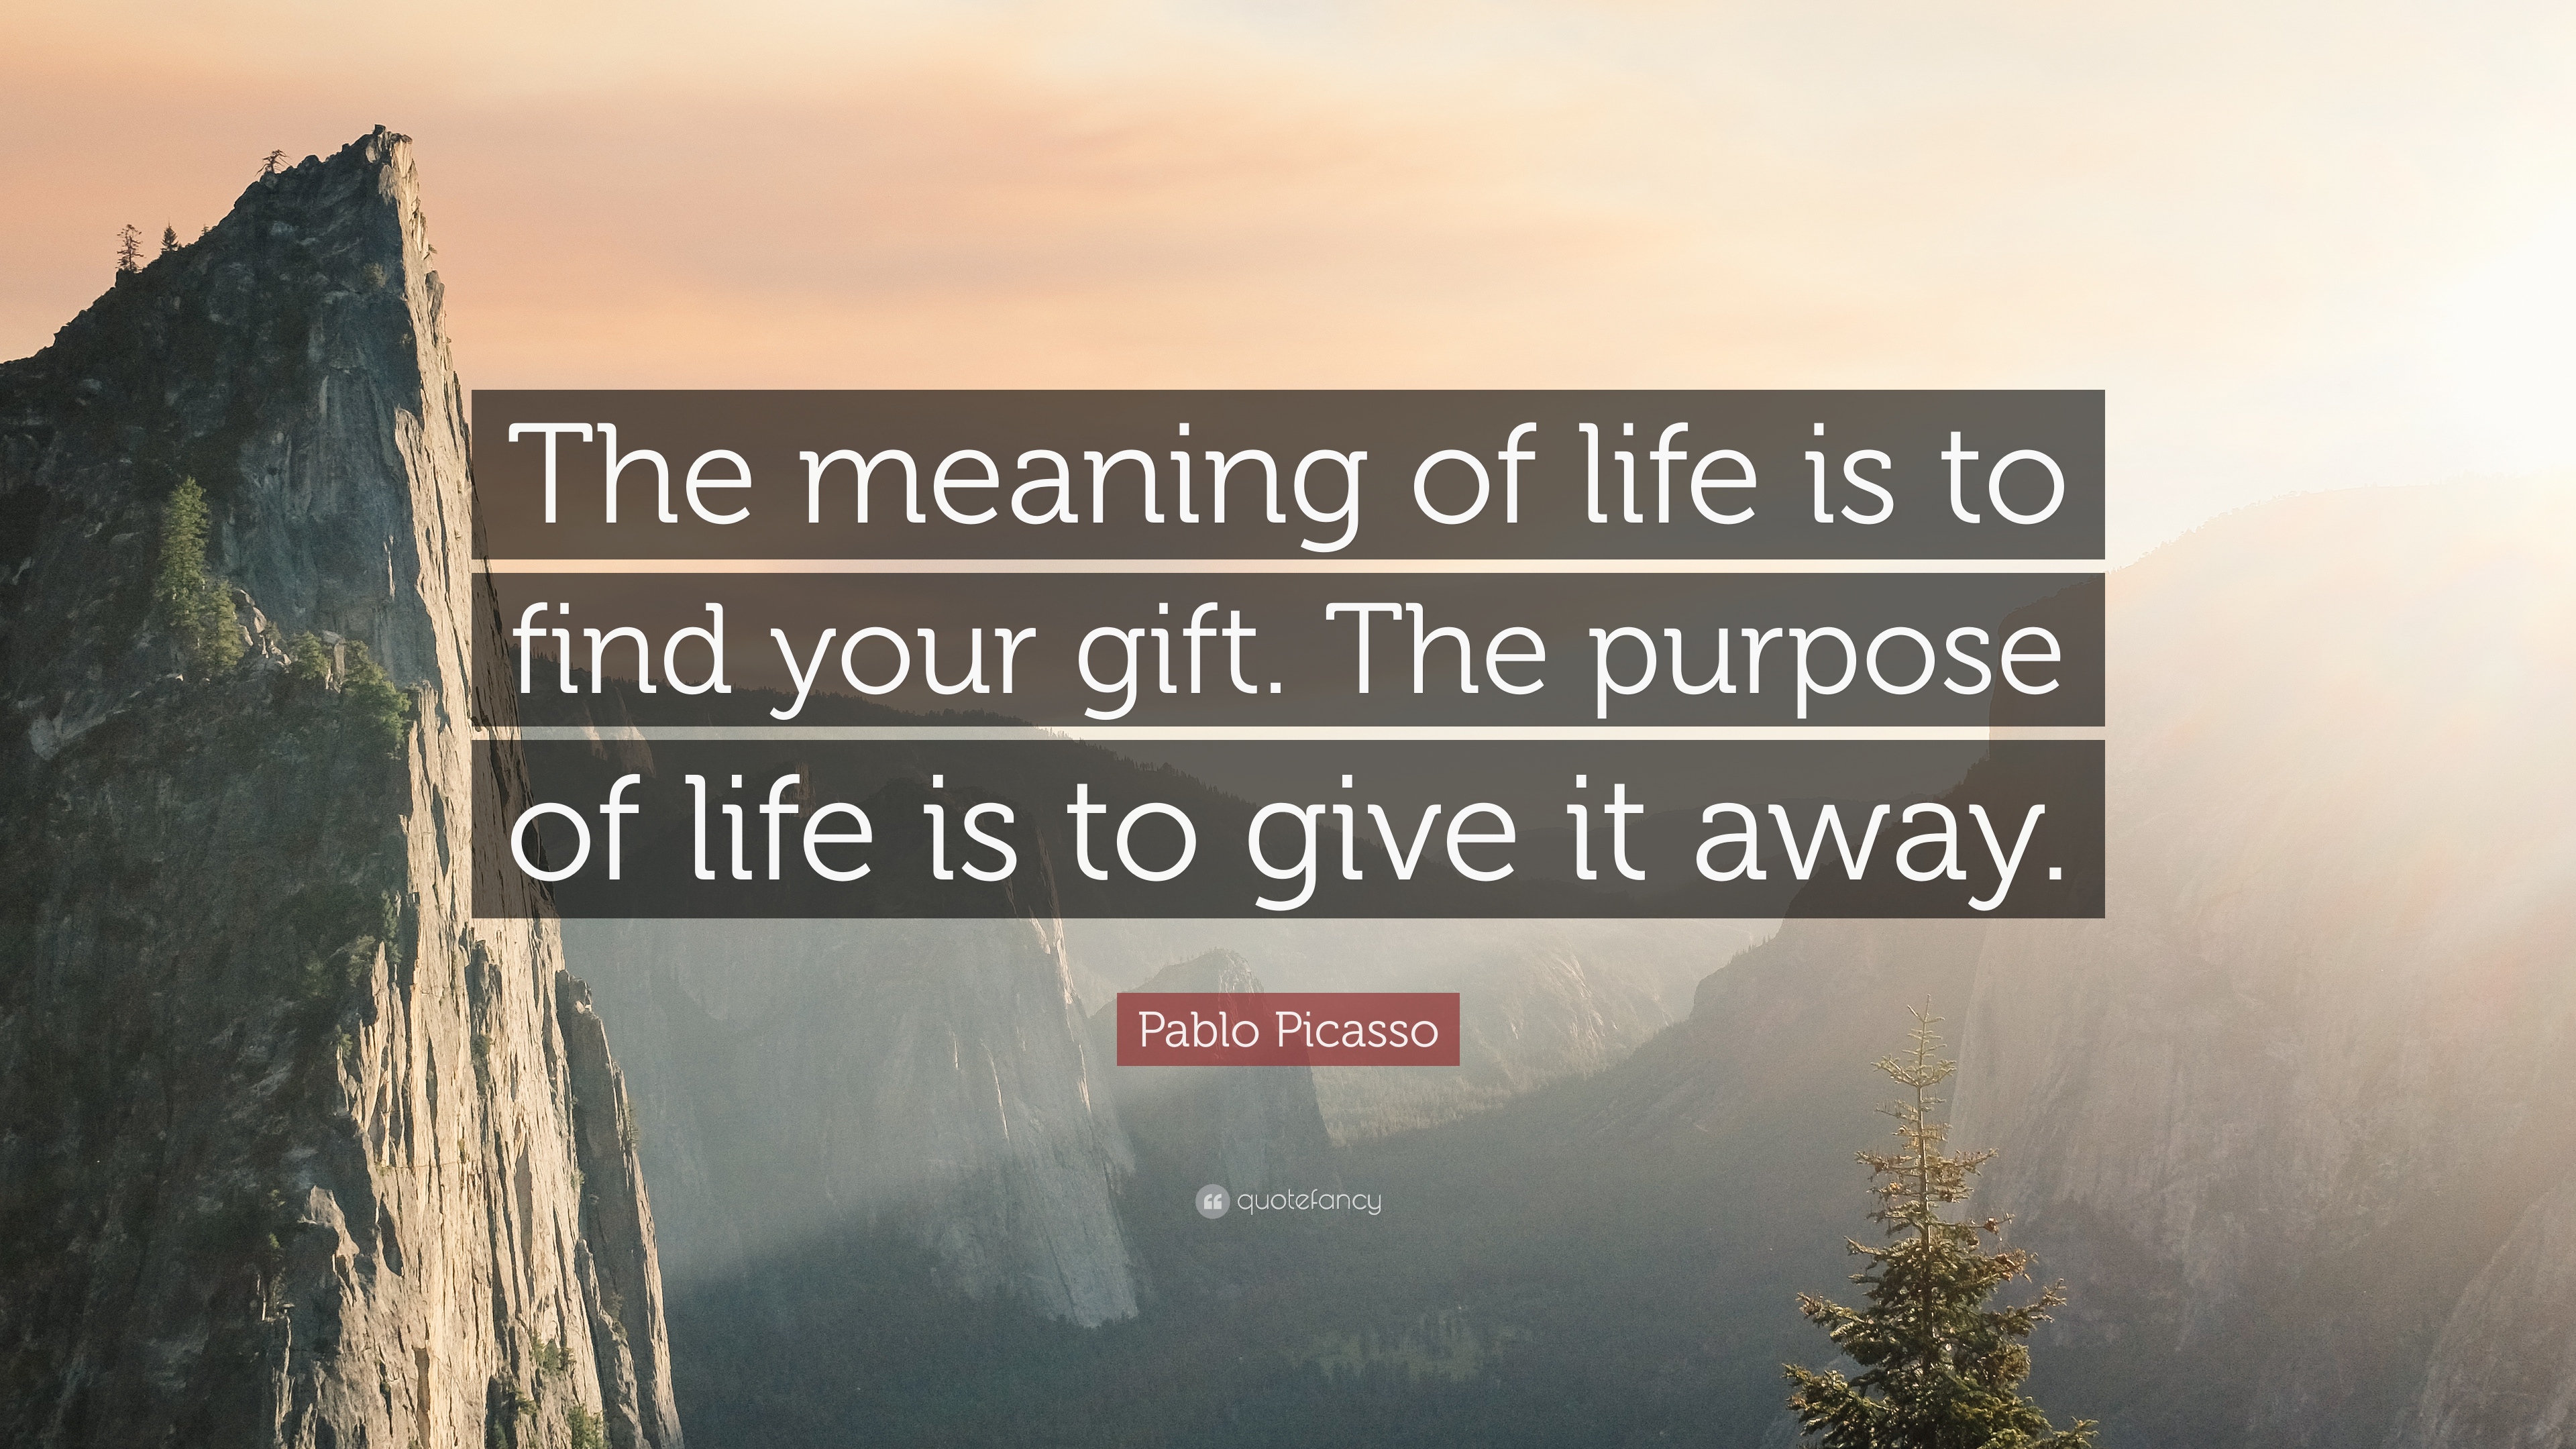 Meaning and purpose of life essay